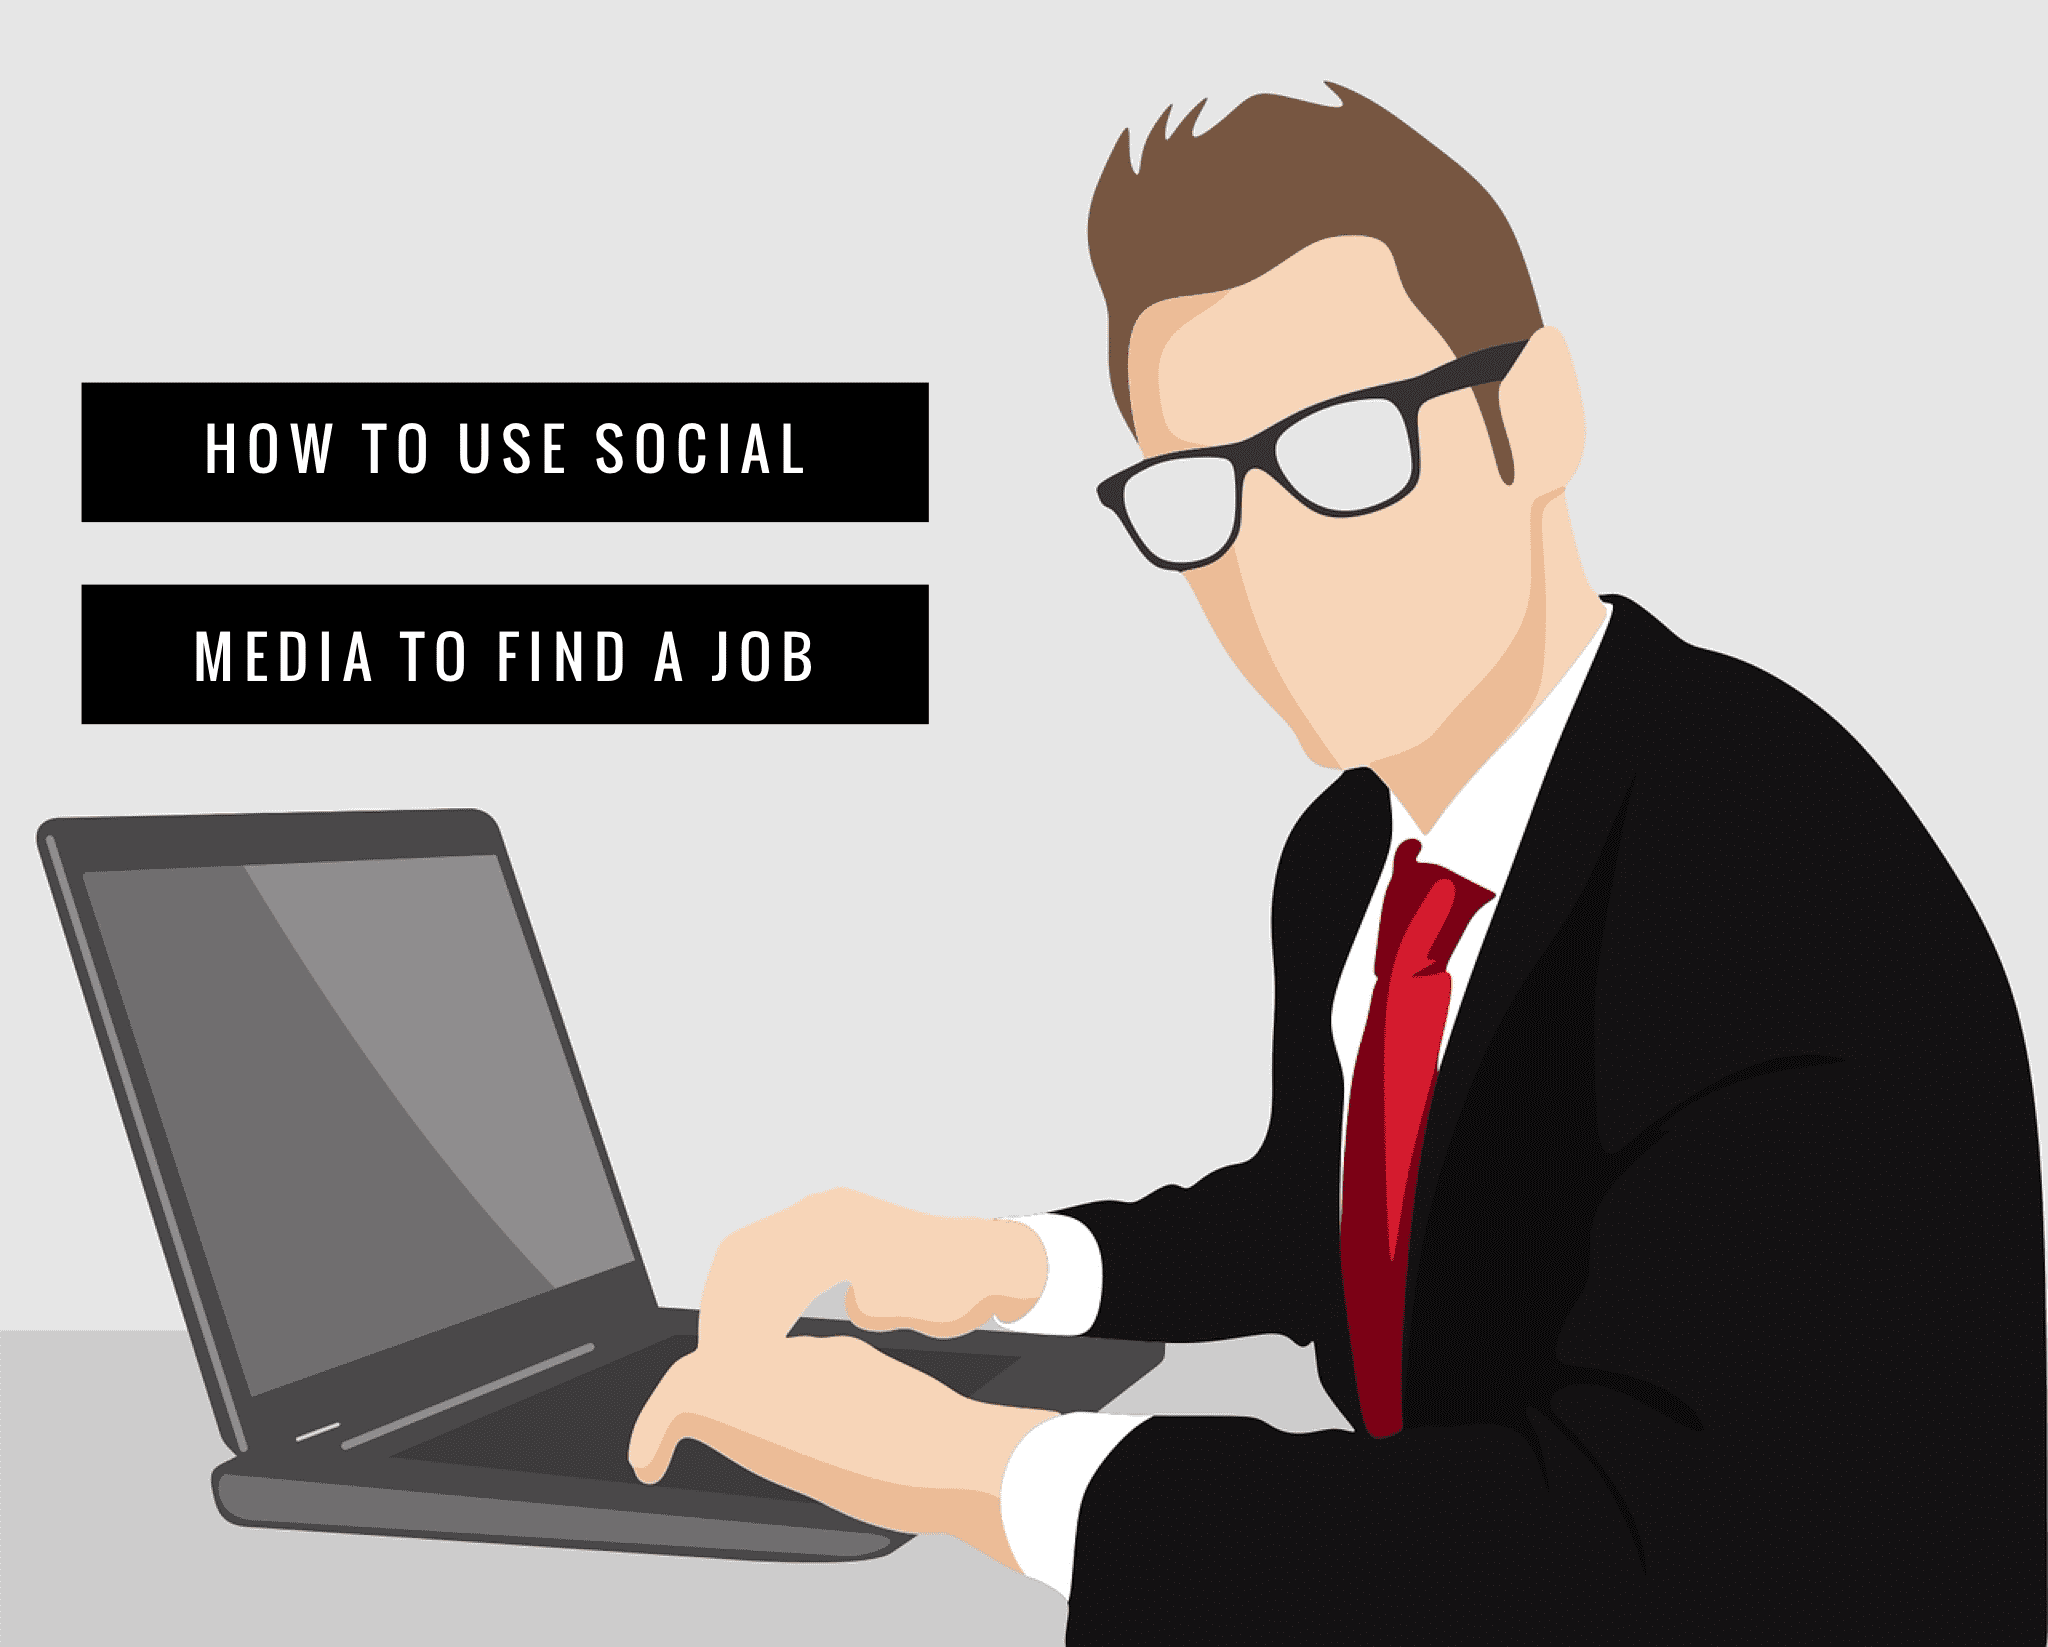 How To Use Social Media To Find A Job